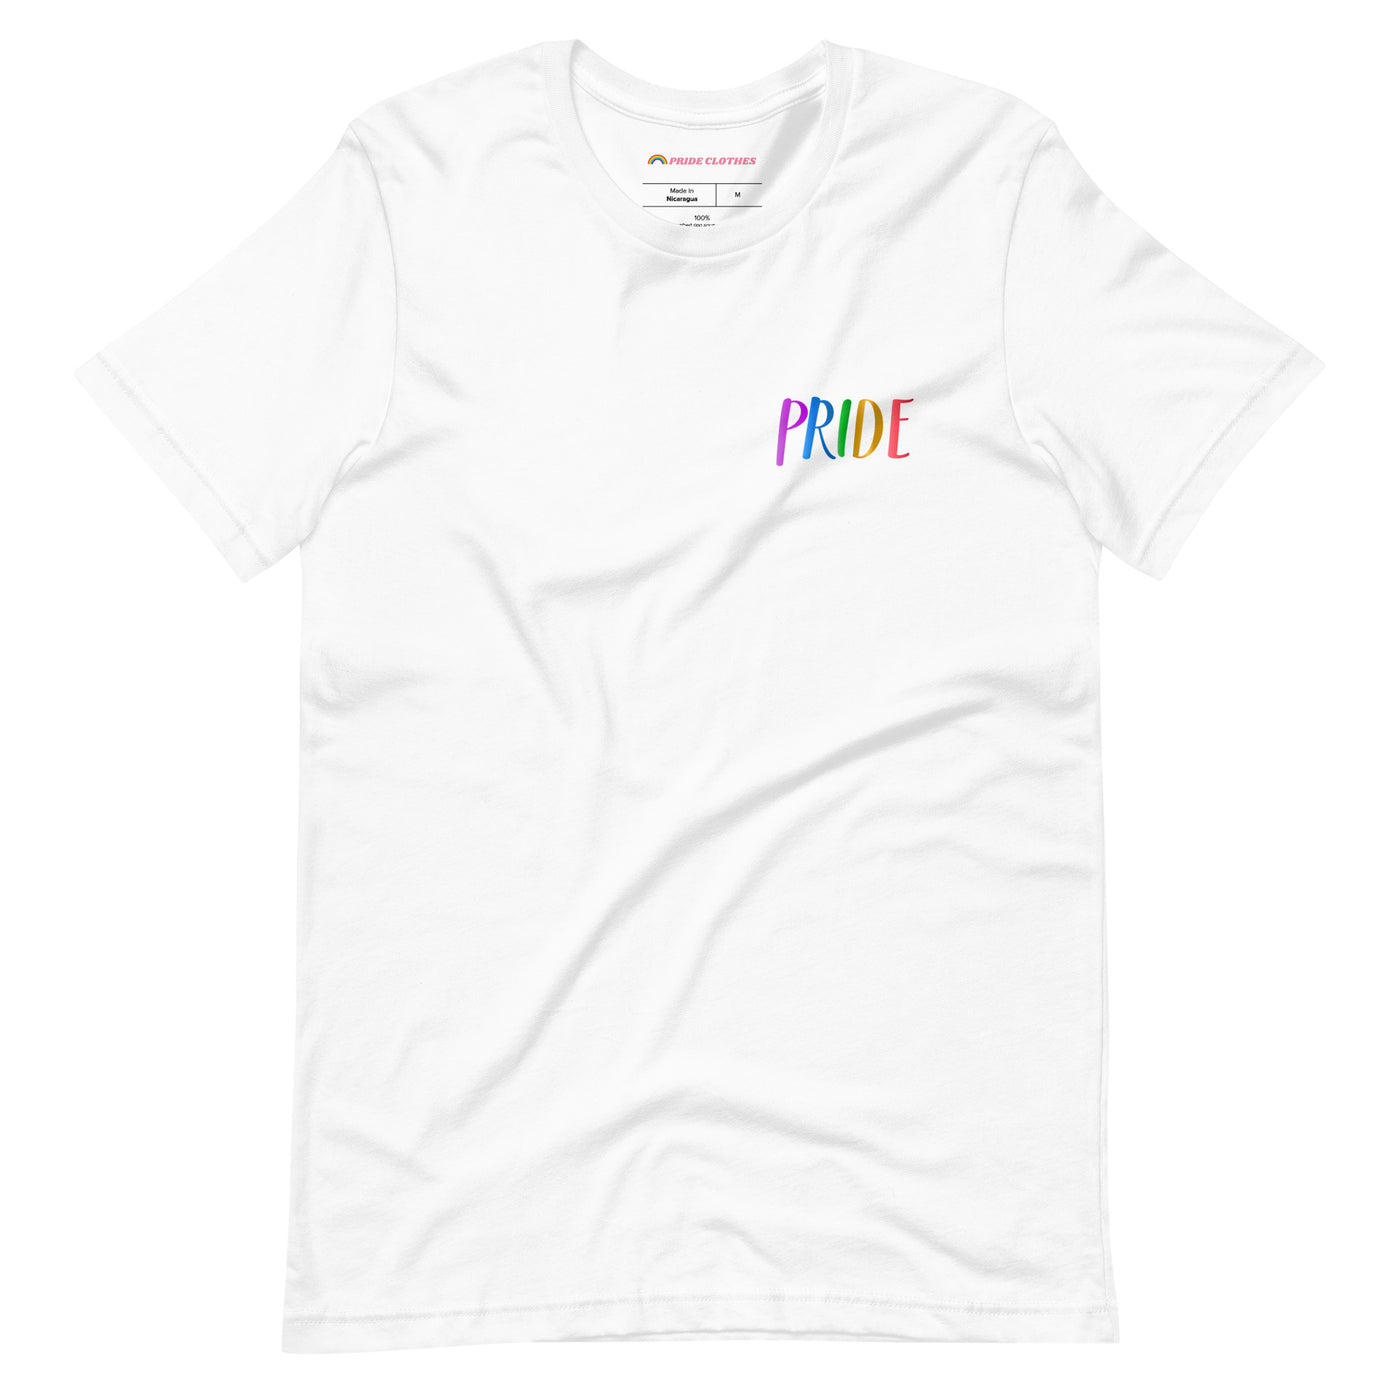 Pride Clothes - A Simple and Proud Gay Shirt for You - White